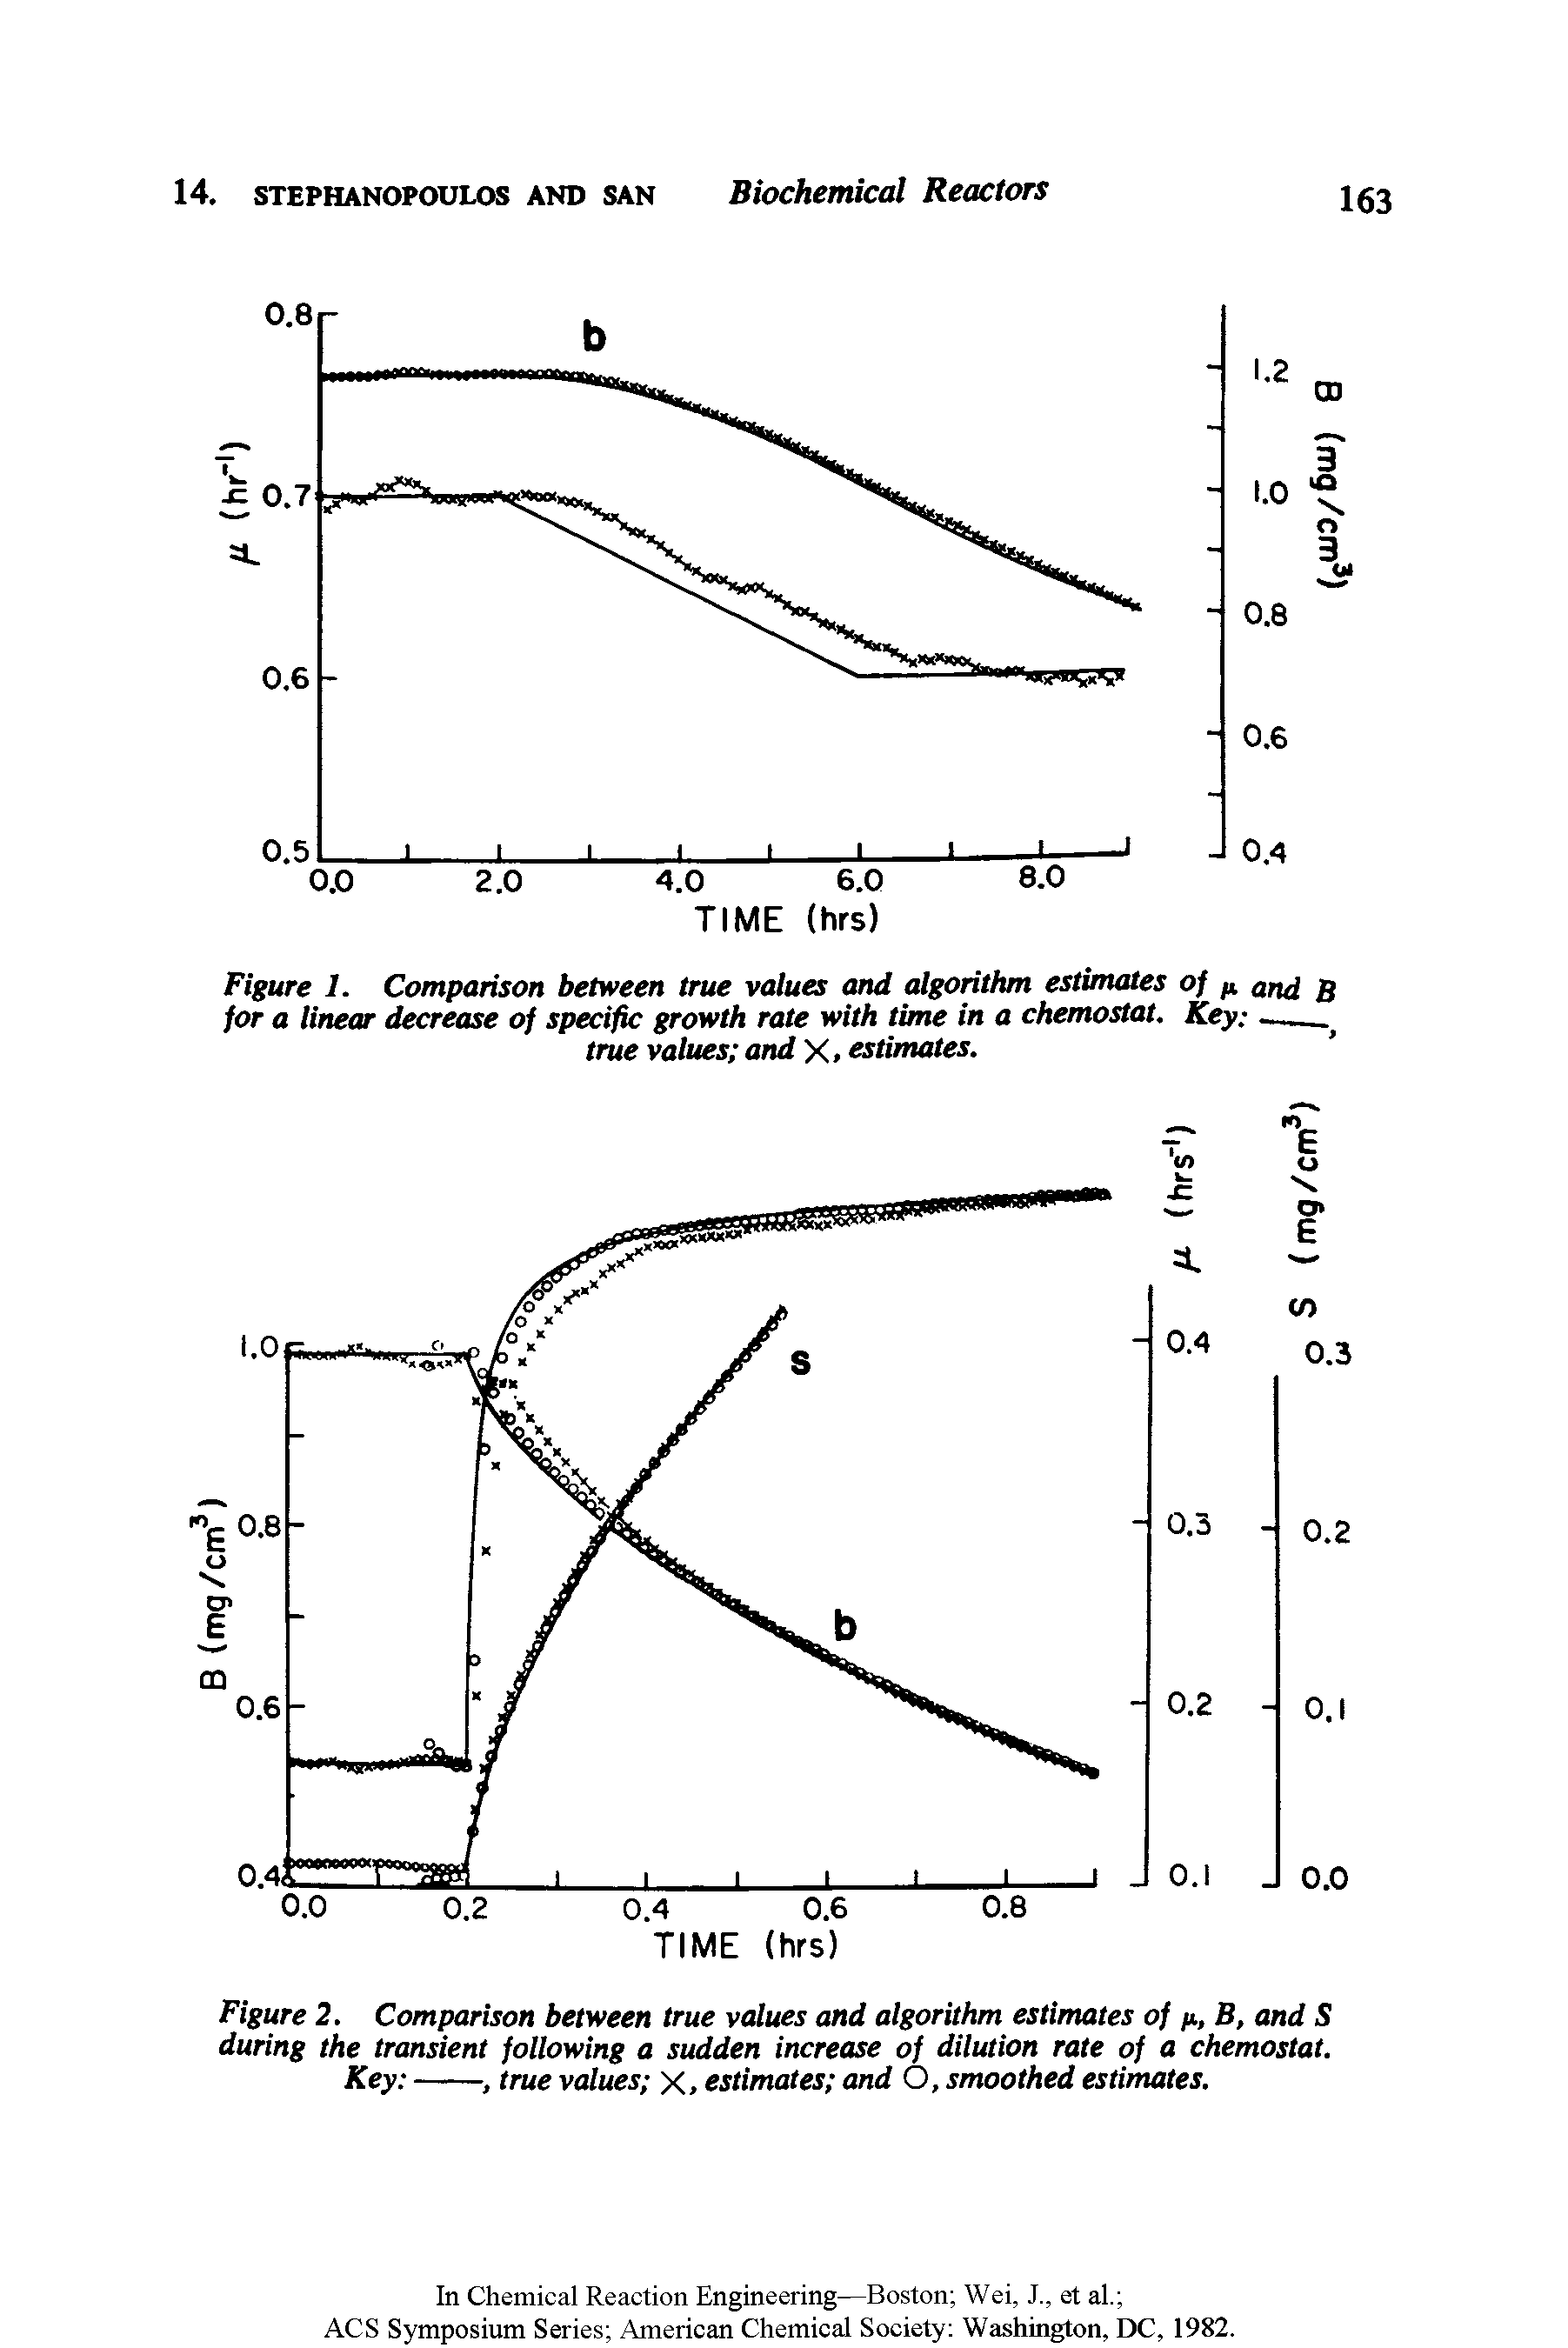 Figure 2. Comparison between true values and algorithm estimates of p, B, and S during the transient following a sudden increase of dilution rate of a chemostat. Key -------------, true values x, estimates and O, smoothed estimates.